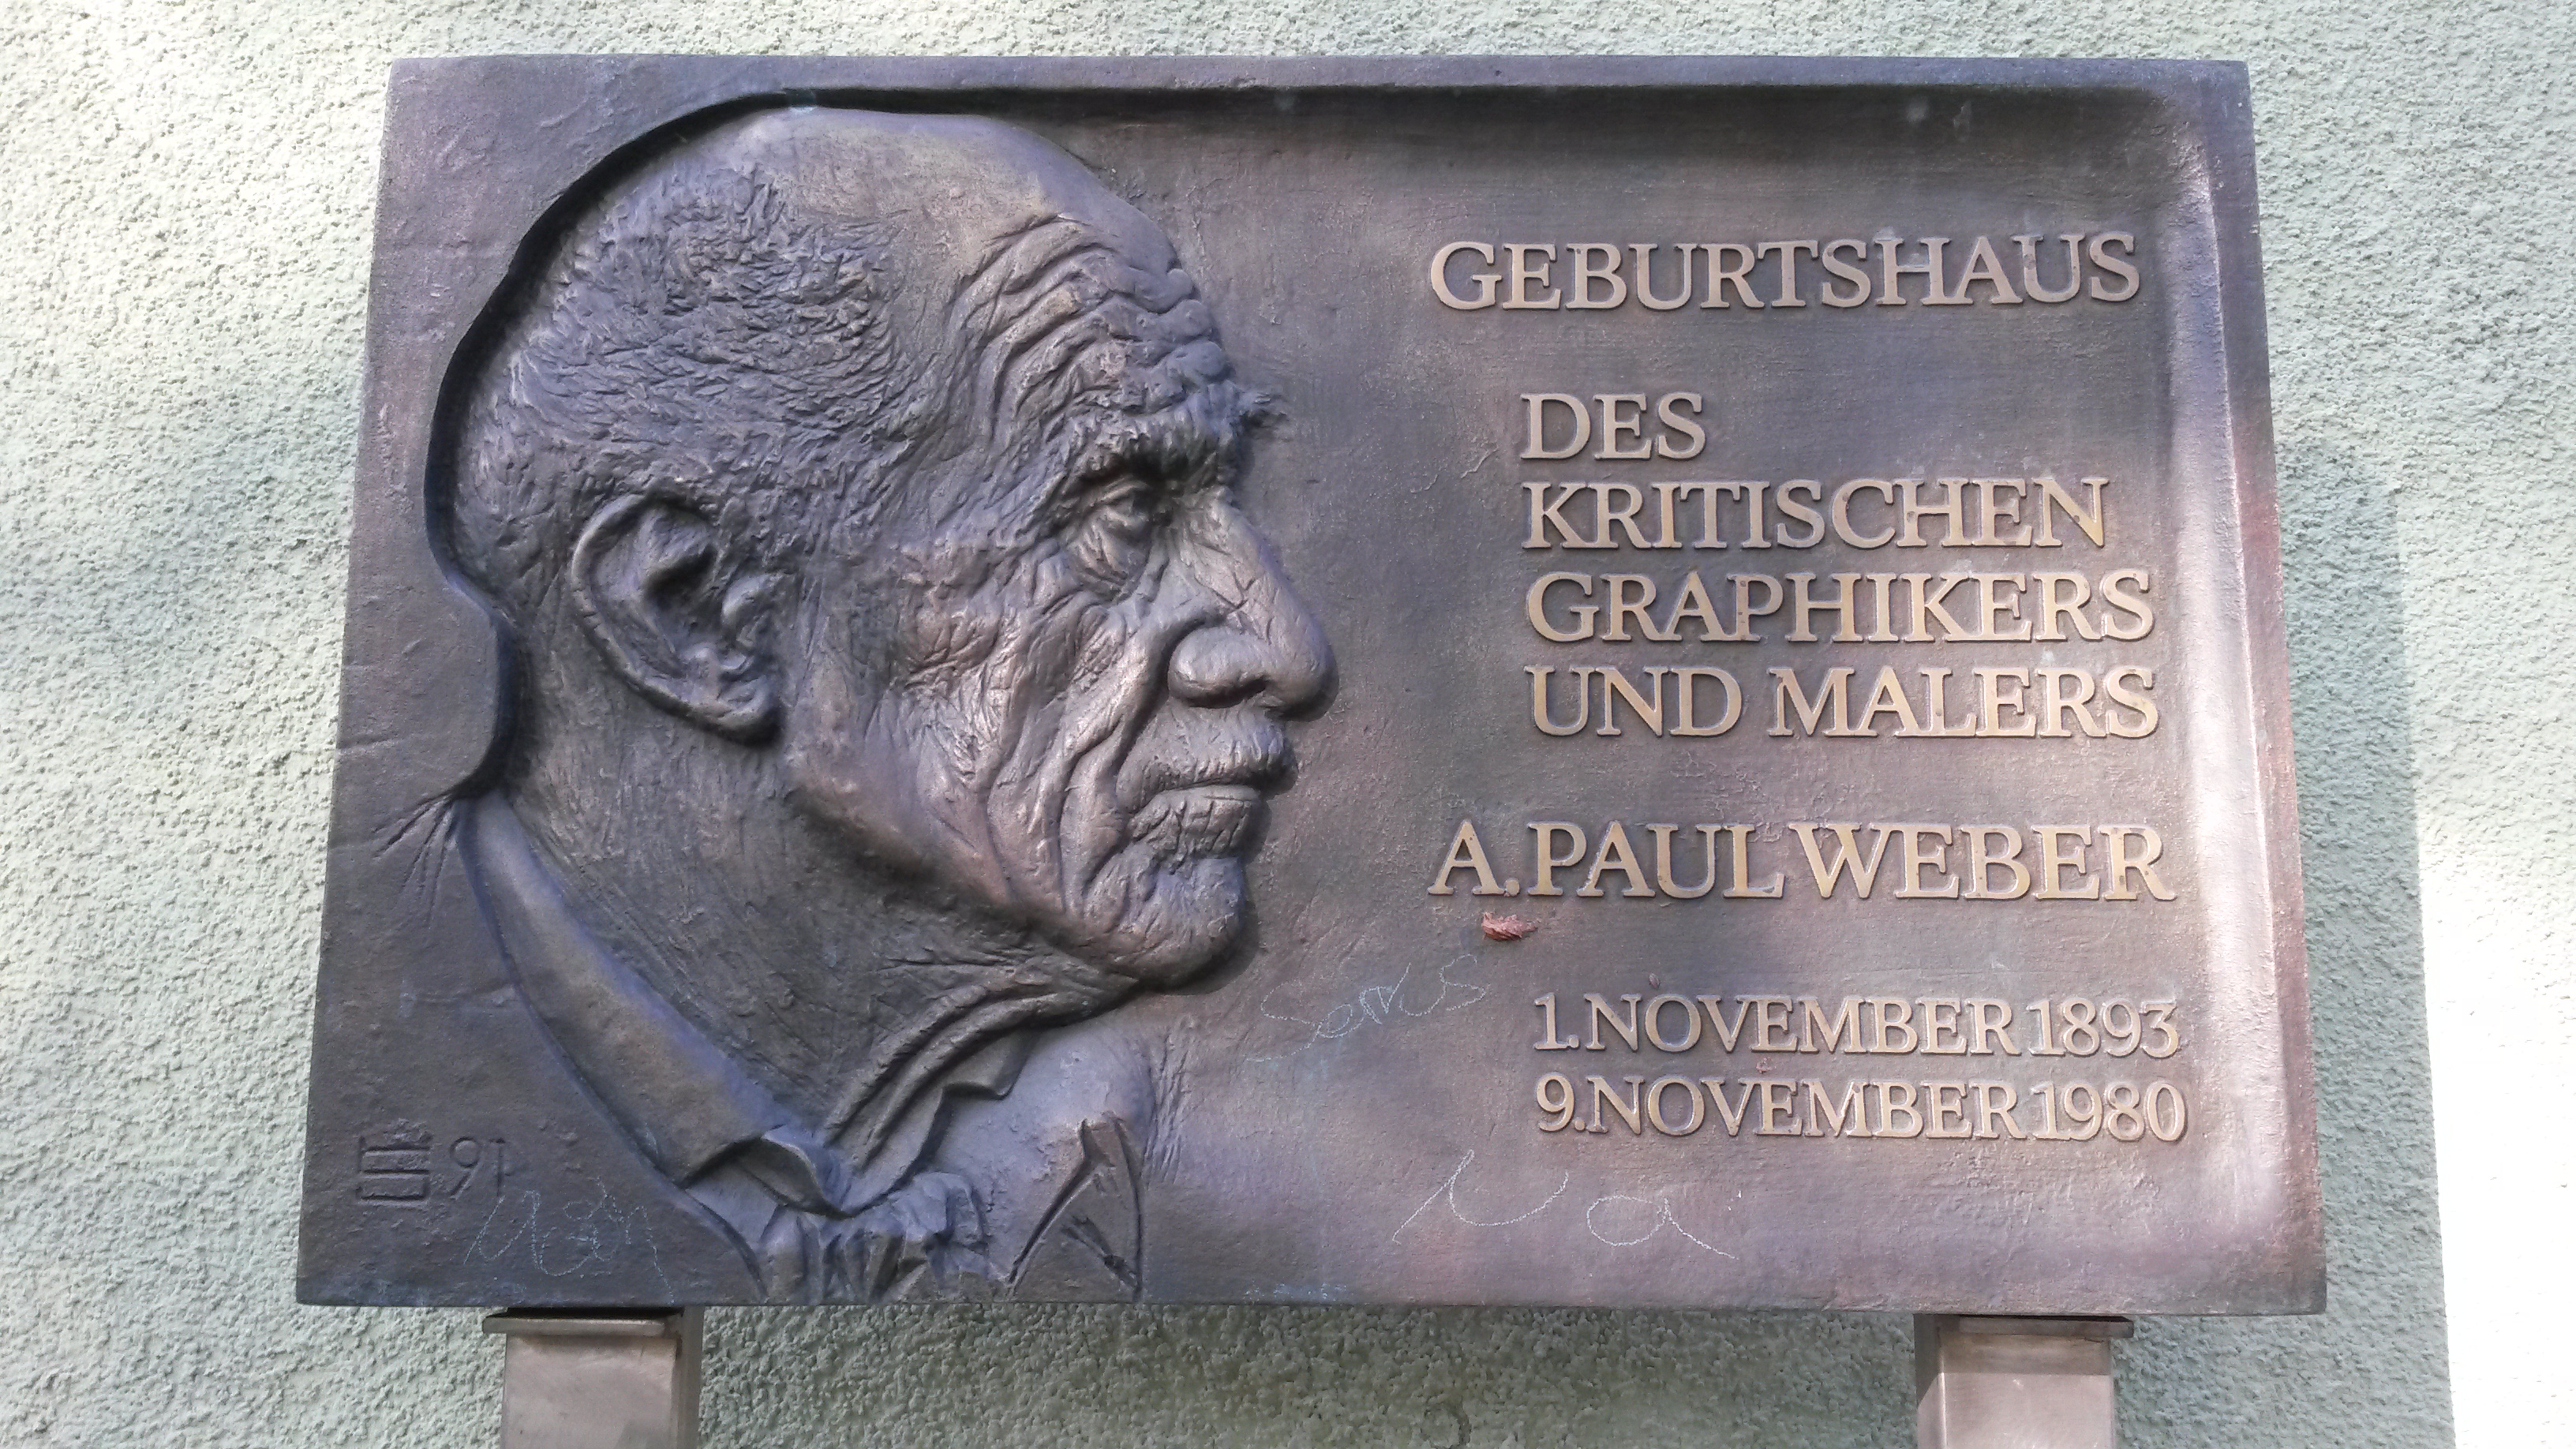 Memorial plaque at the birthplace of A. Paul Weber in Arnstadt, Thuringia